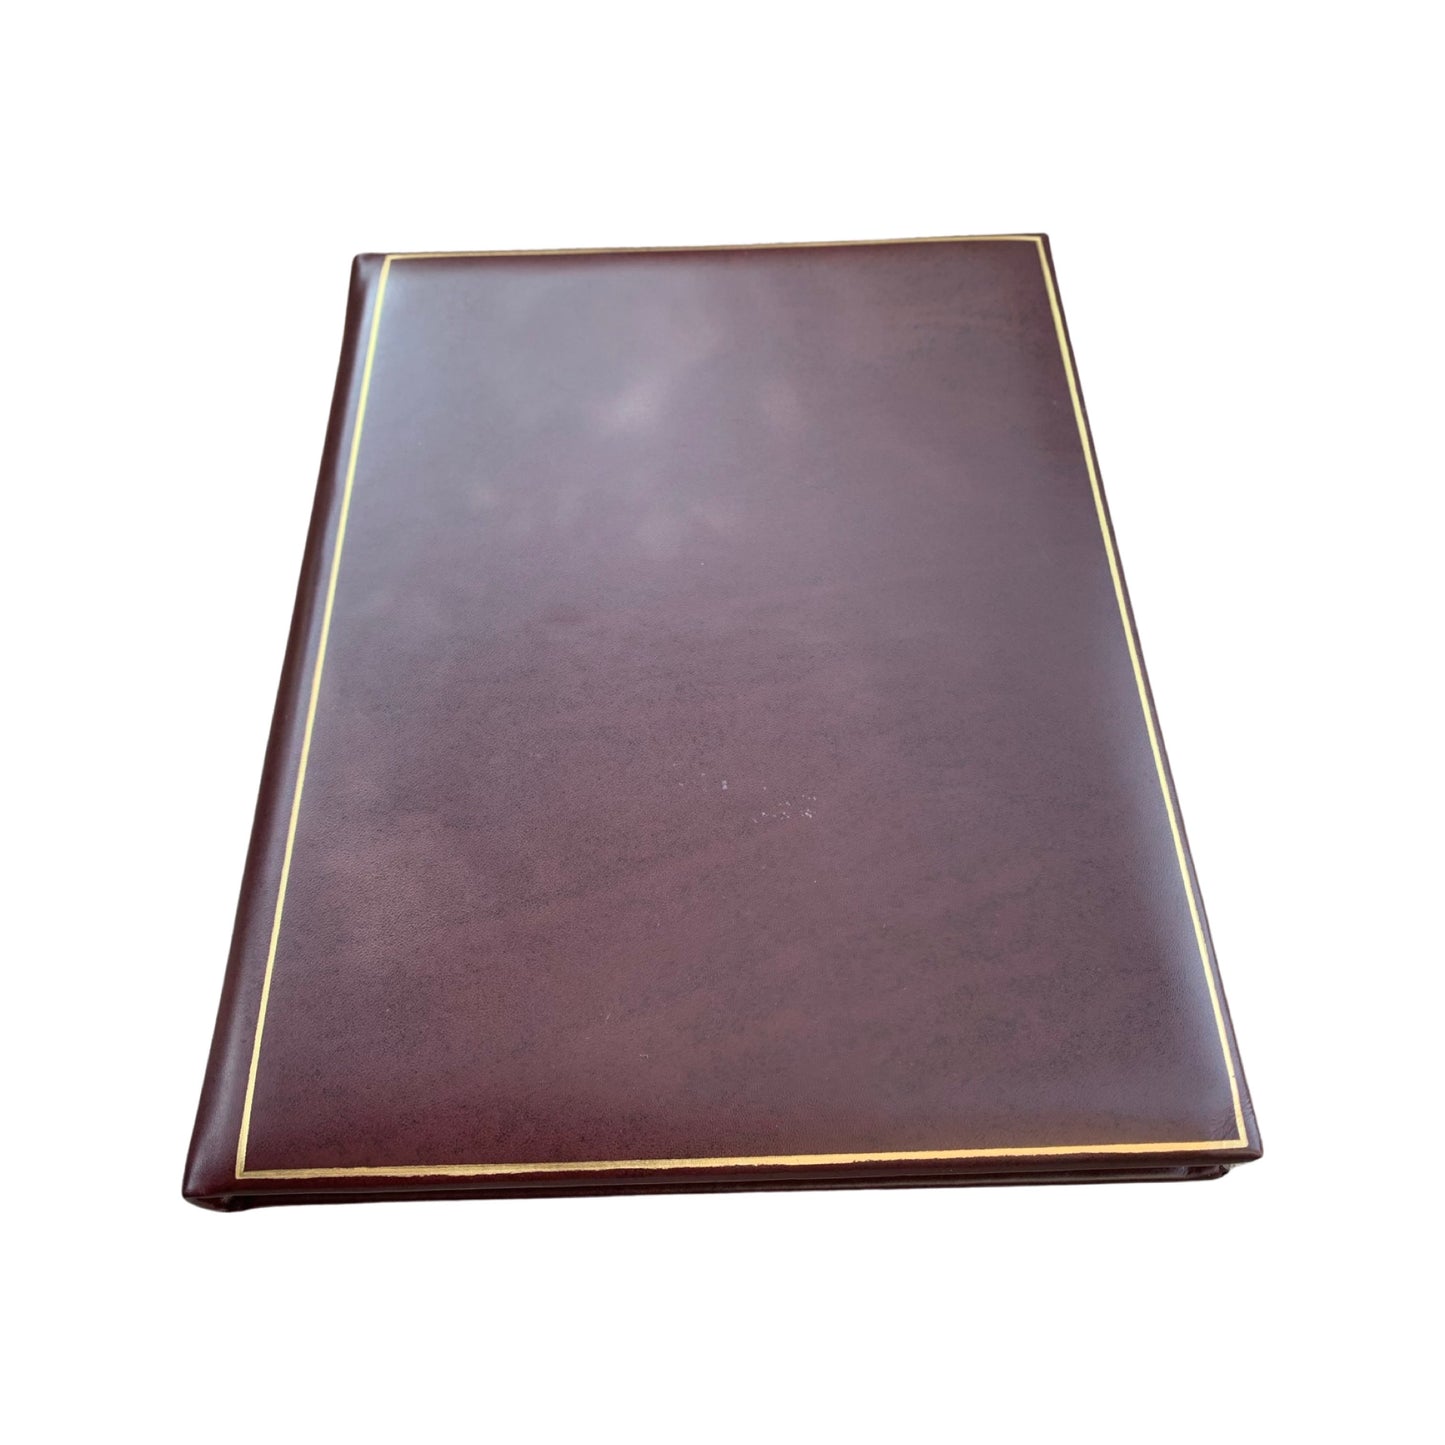 Classic Leather Guest Book | 10 by 8 Inches Vertical | Polished Calf Leather | Gold Tooling | Lined Pages | G108CA